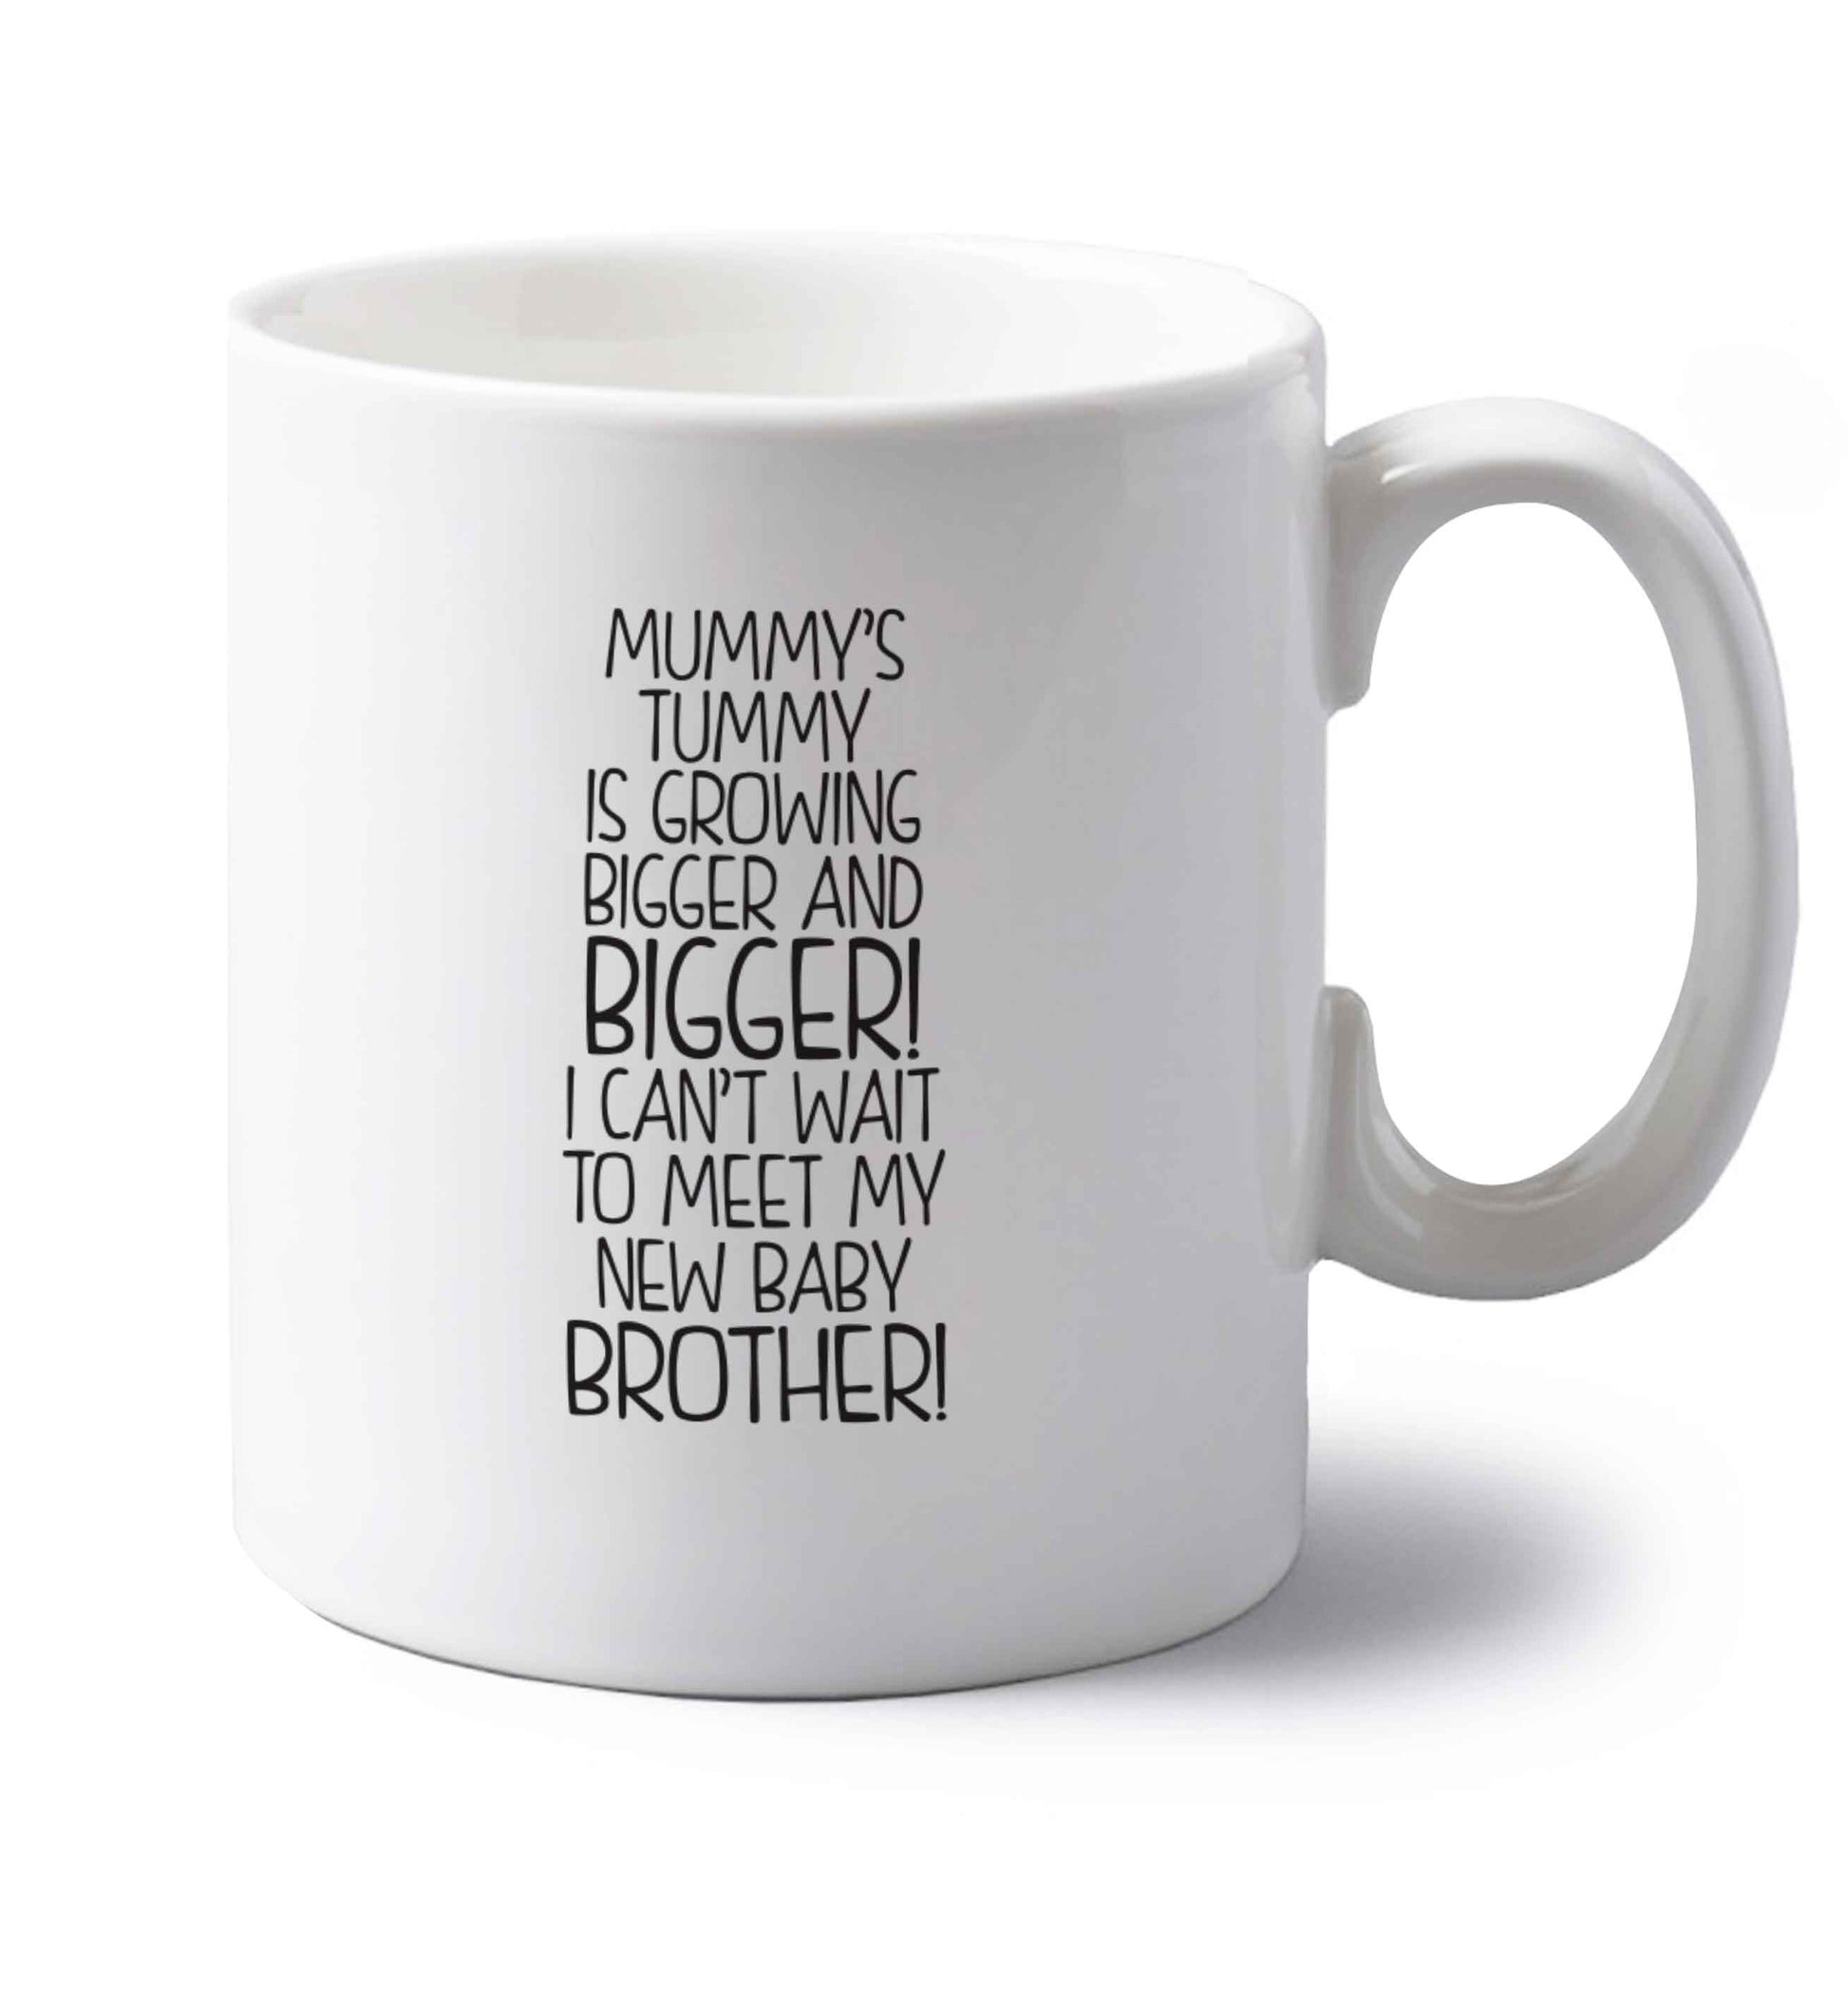 Mummy's tummy is growing bigger and bigger I can't wait to meet my new baby brother! left handed white ceramic mug 